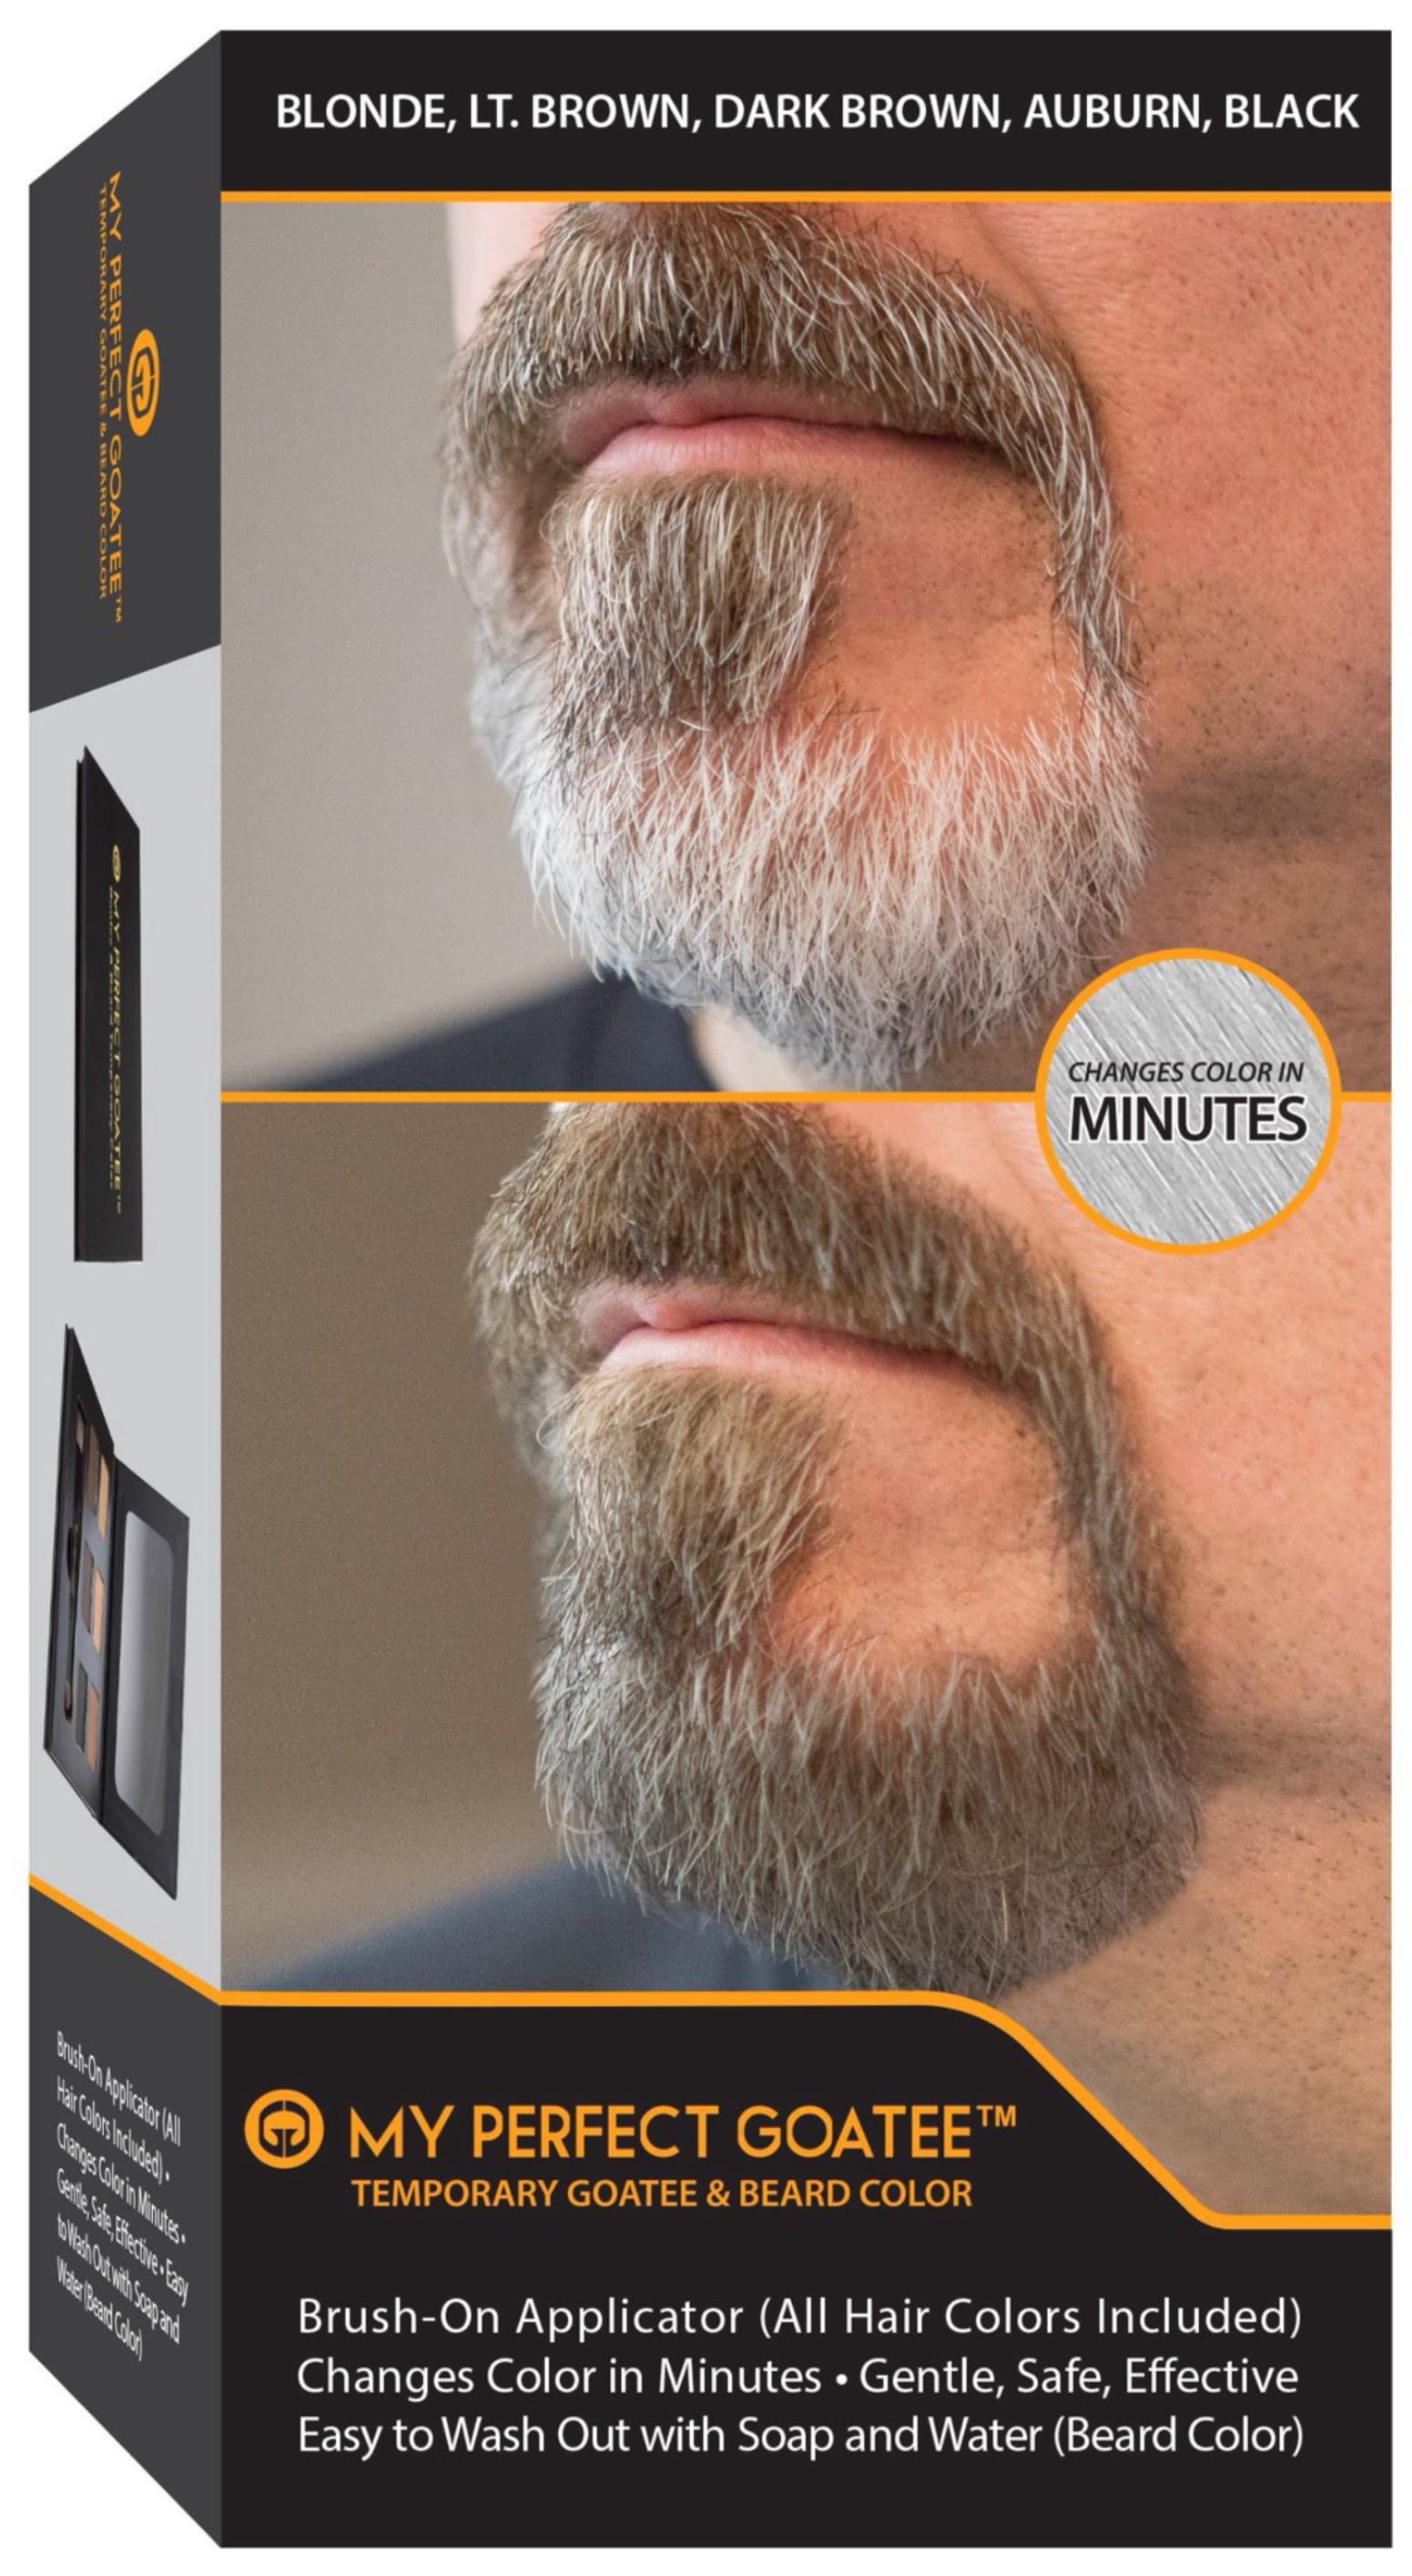 My Perfect Goatee & Beard Temporary Color, Brush-on Applicator 